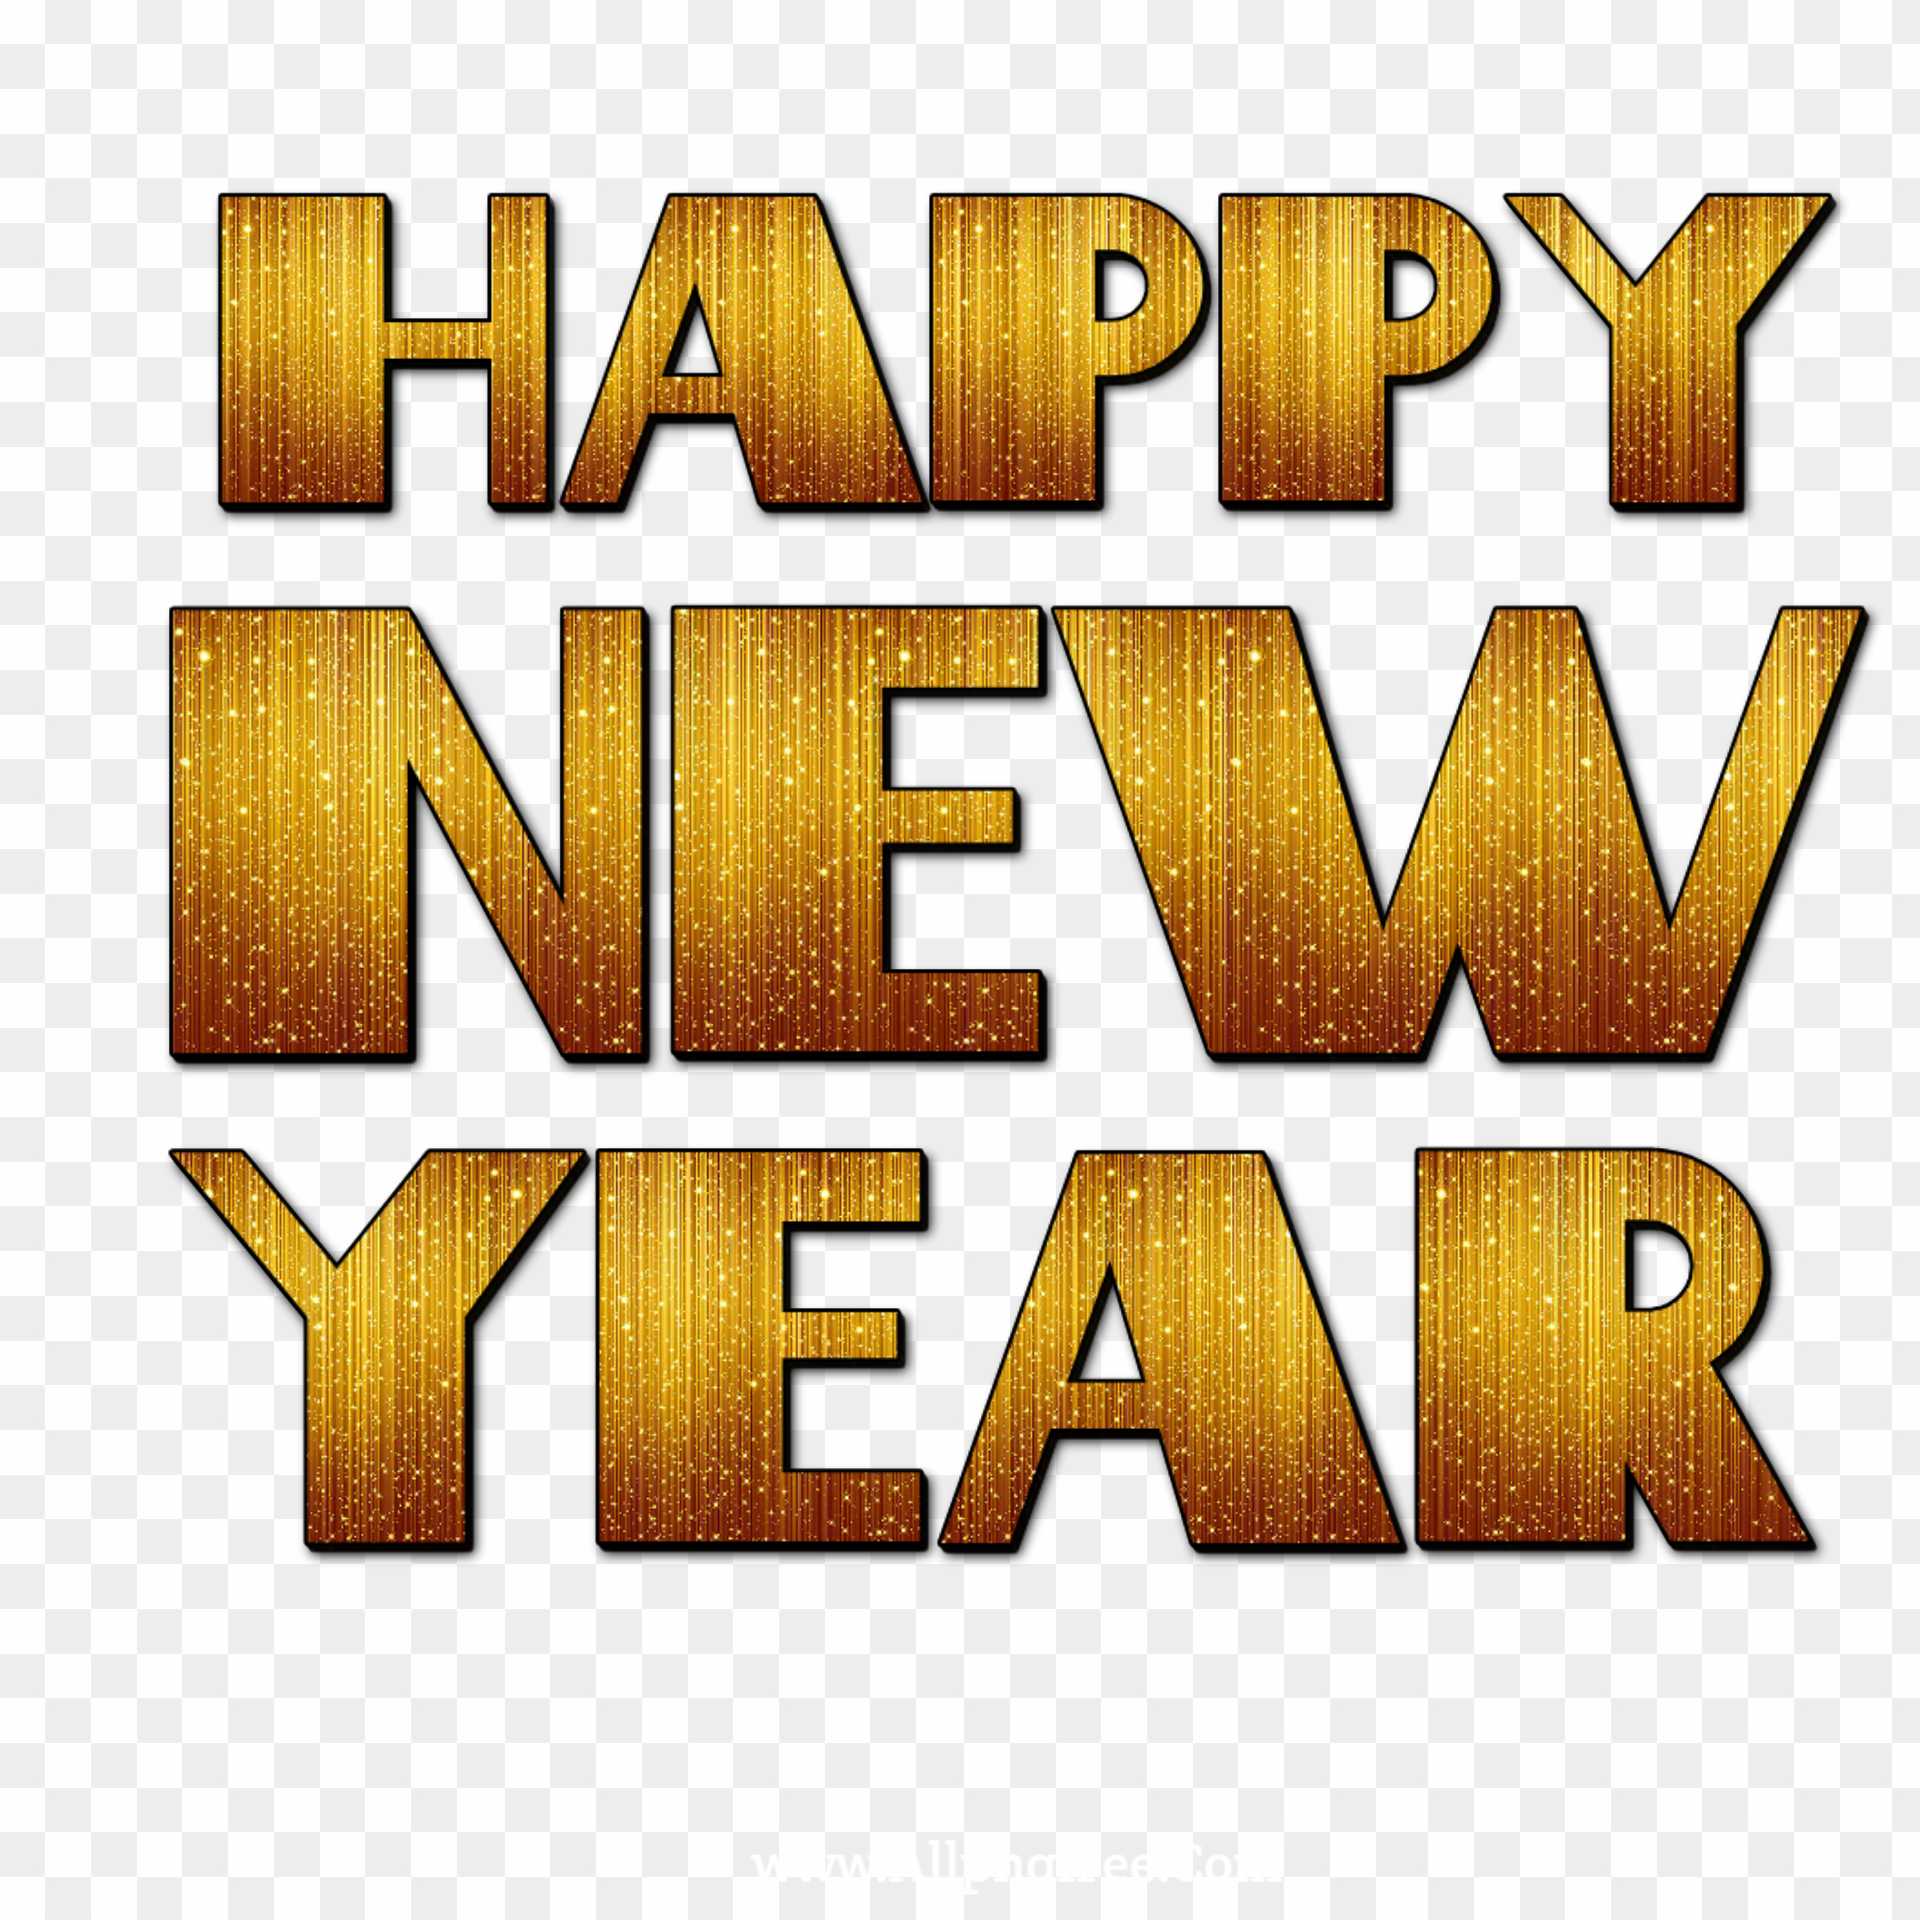 Happy New Year Png images download free 